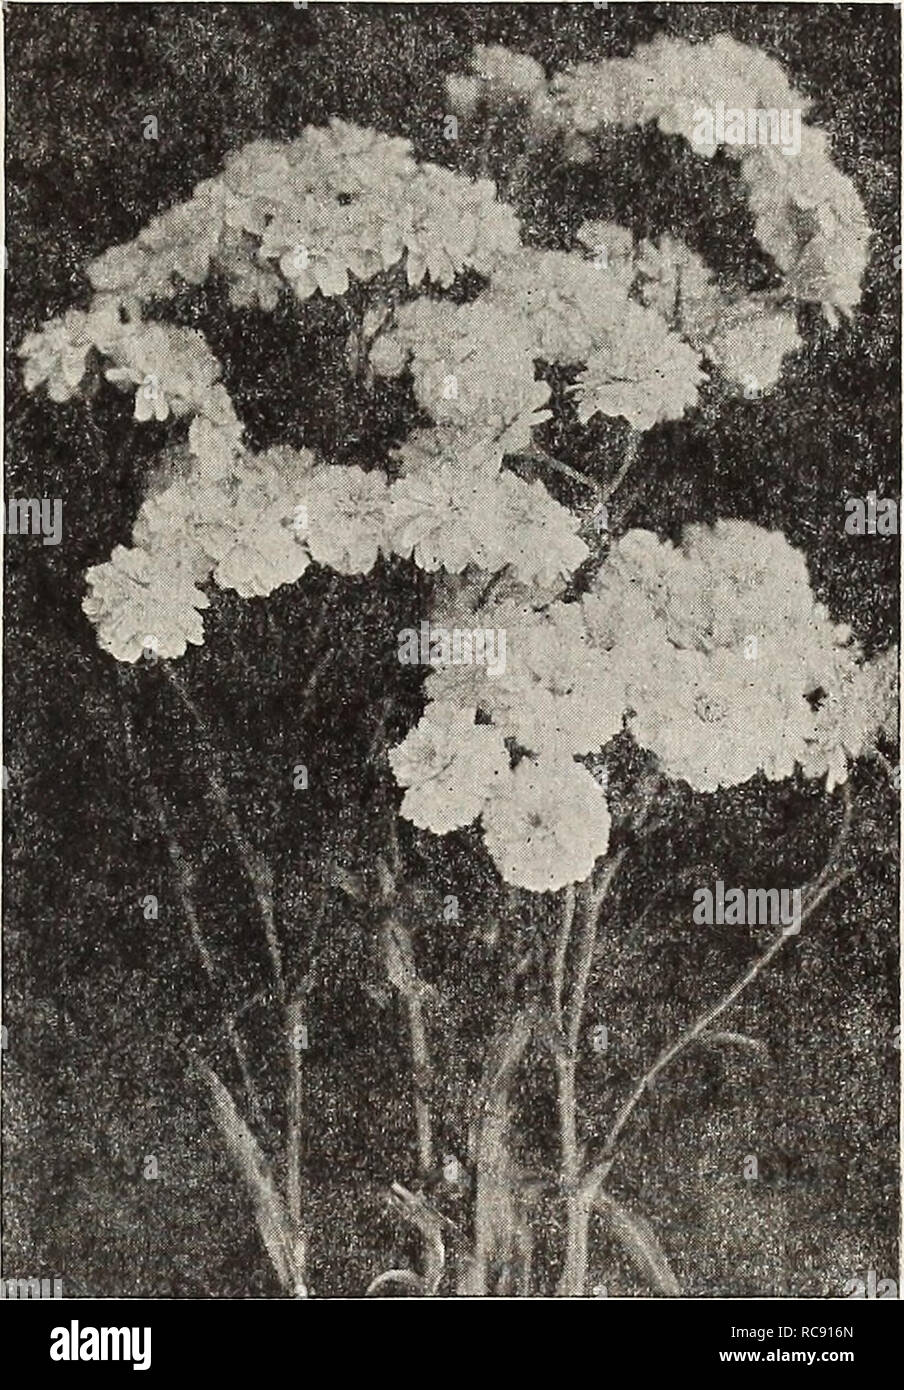 . Dreer's garden book 1917. Seeds Catalogs; Nursery stock Catalogs; Gardening Equipment and supplies Catalogs; Flowers Seeds Catalogs; Vegetables Seeds Catalogs; Fruit Seeds Catalogs. Achillea Ptarmica &quot;The Pearl&quot; Acoiutum Napellus Filipendula (Noble Tar- row). A vig- orous showy species, with gol den-yel- low flowers in dense flat corymbs in July; height, 2 feet. Millefolium Roseum (Rosy Milfoil). Finely cut, deep green foliage, flowers pink in dense heads; 18 inches high and flowers all summer. Ptarmica Fl. PI. &quot;The Pearl.&quot; Pure white flowers borne in the greatest profusi Stock Photo